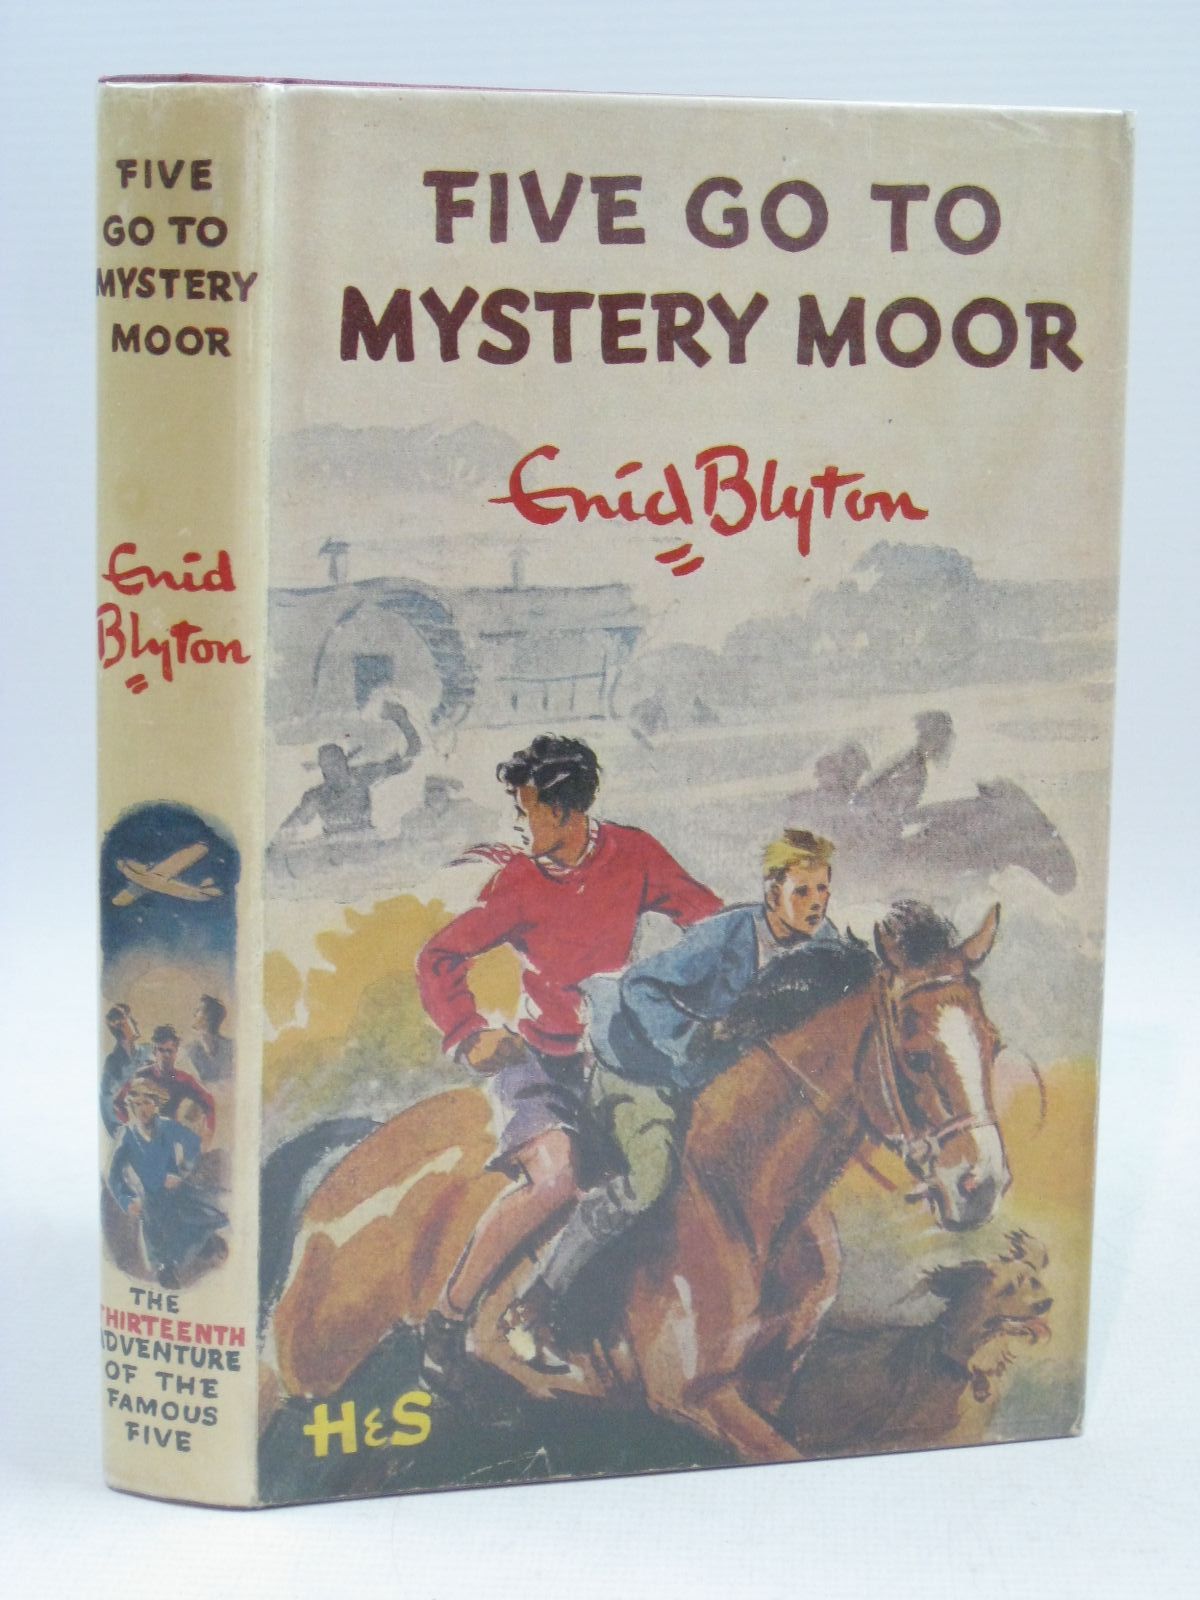 Cover of FIVE GO TO MYSTERY MOOR by Enid Blyton